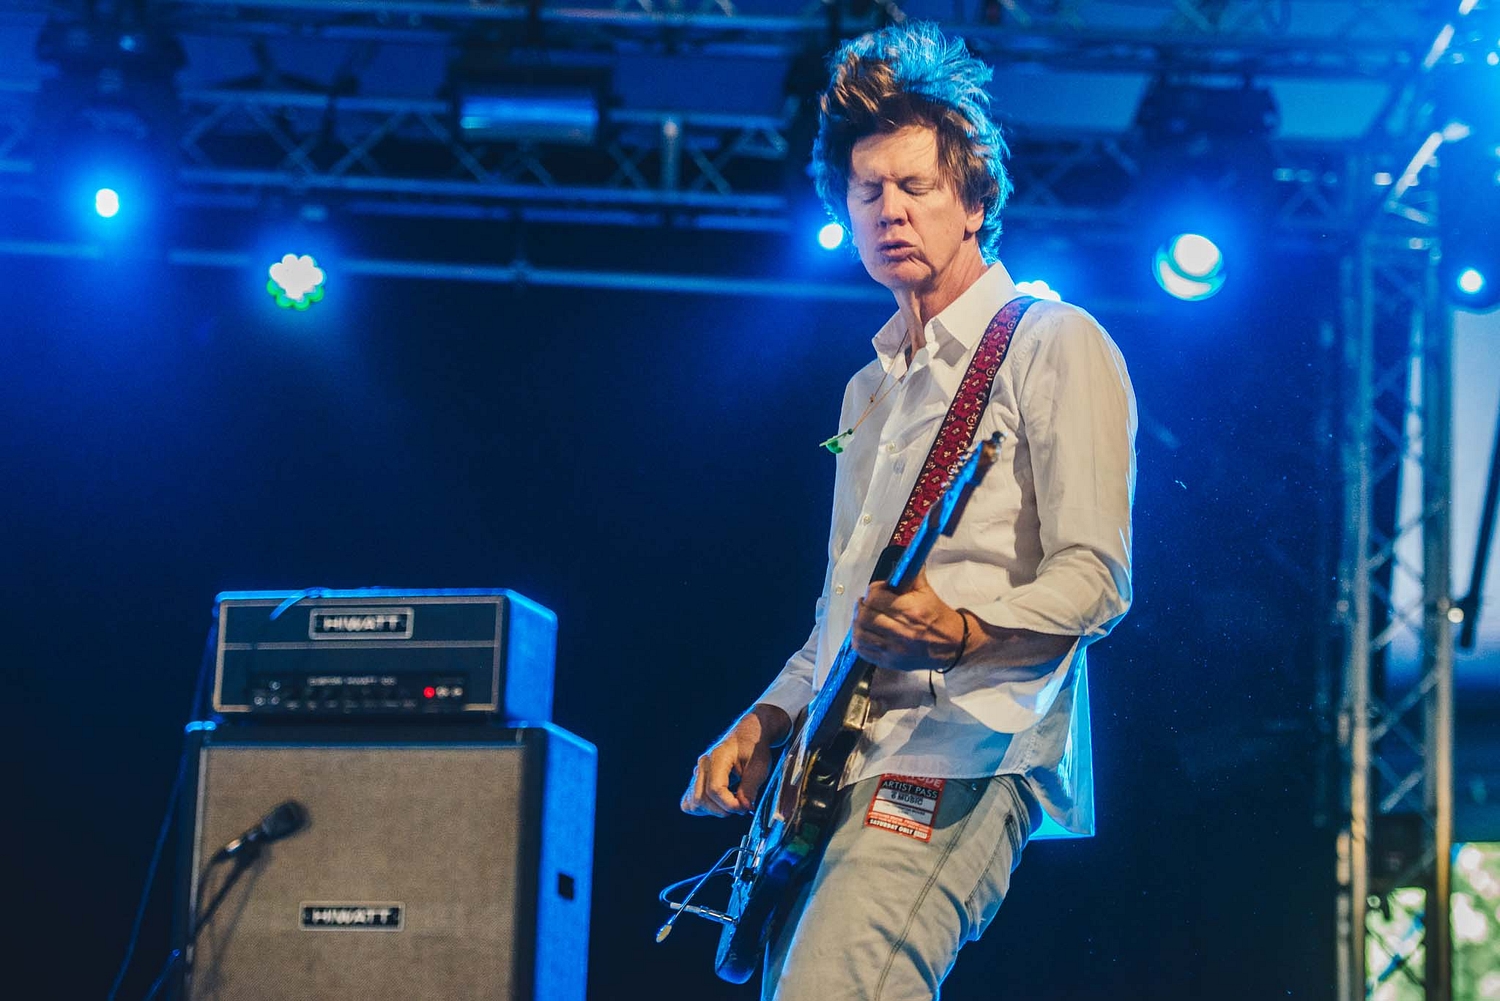 Thurston Moore brings sonic soundwaves to life at Latitude 2015